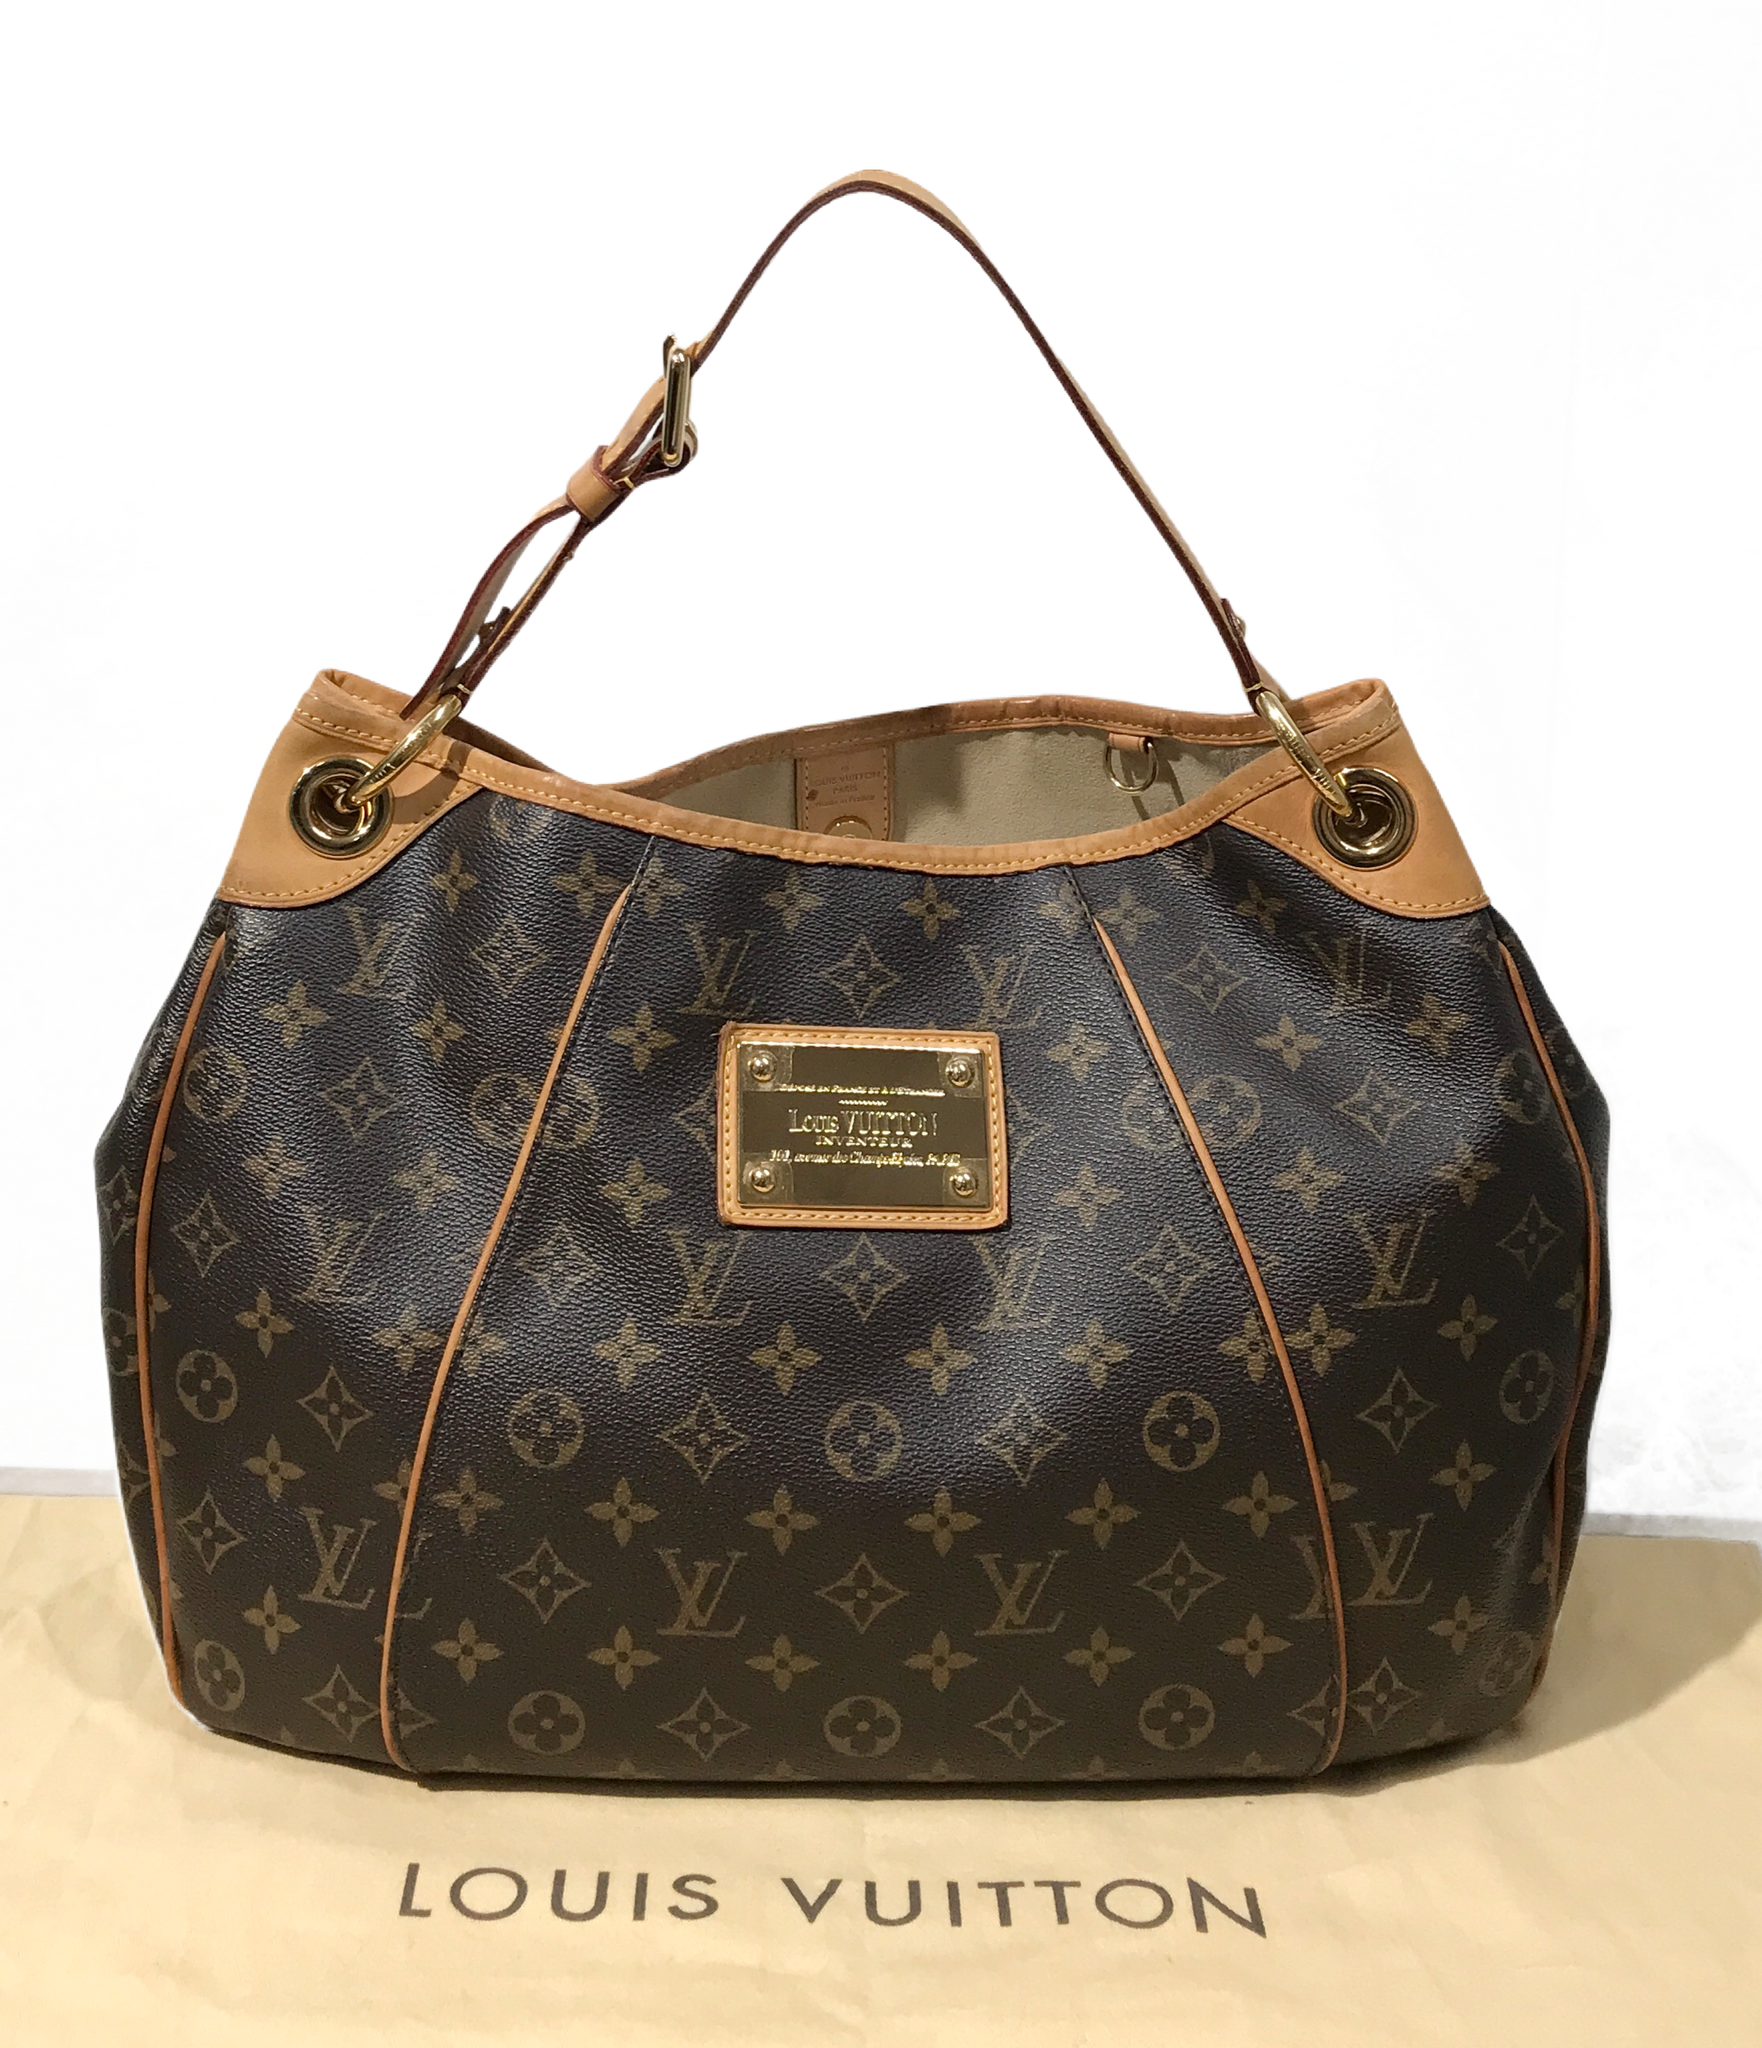 Louis Vuitton Galliera Bag Reference Guide  Spotted Fashion